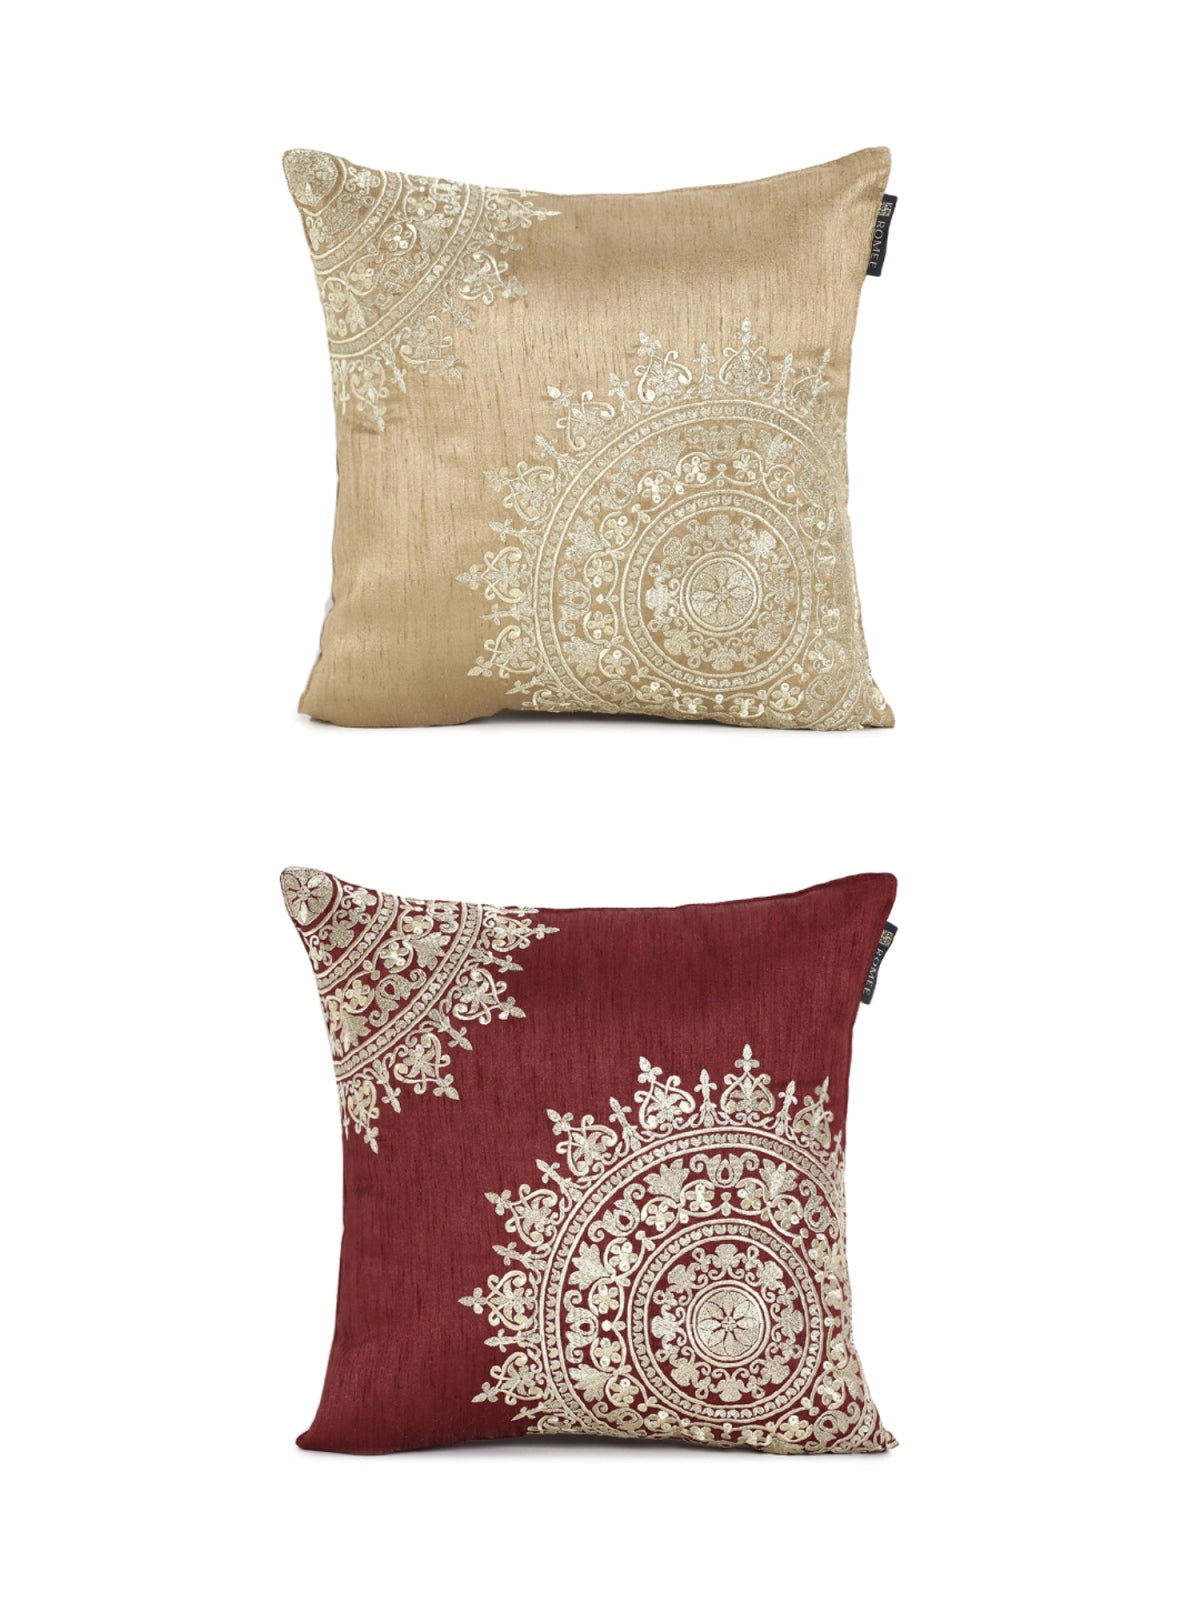 Embroidered 2 Piece Polyester Cushion Cover Set - 16" x 16", Maroon and Beige